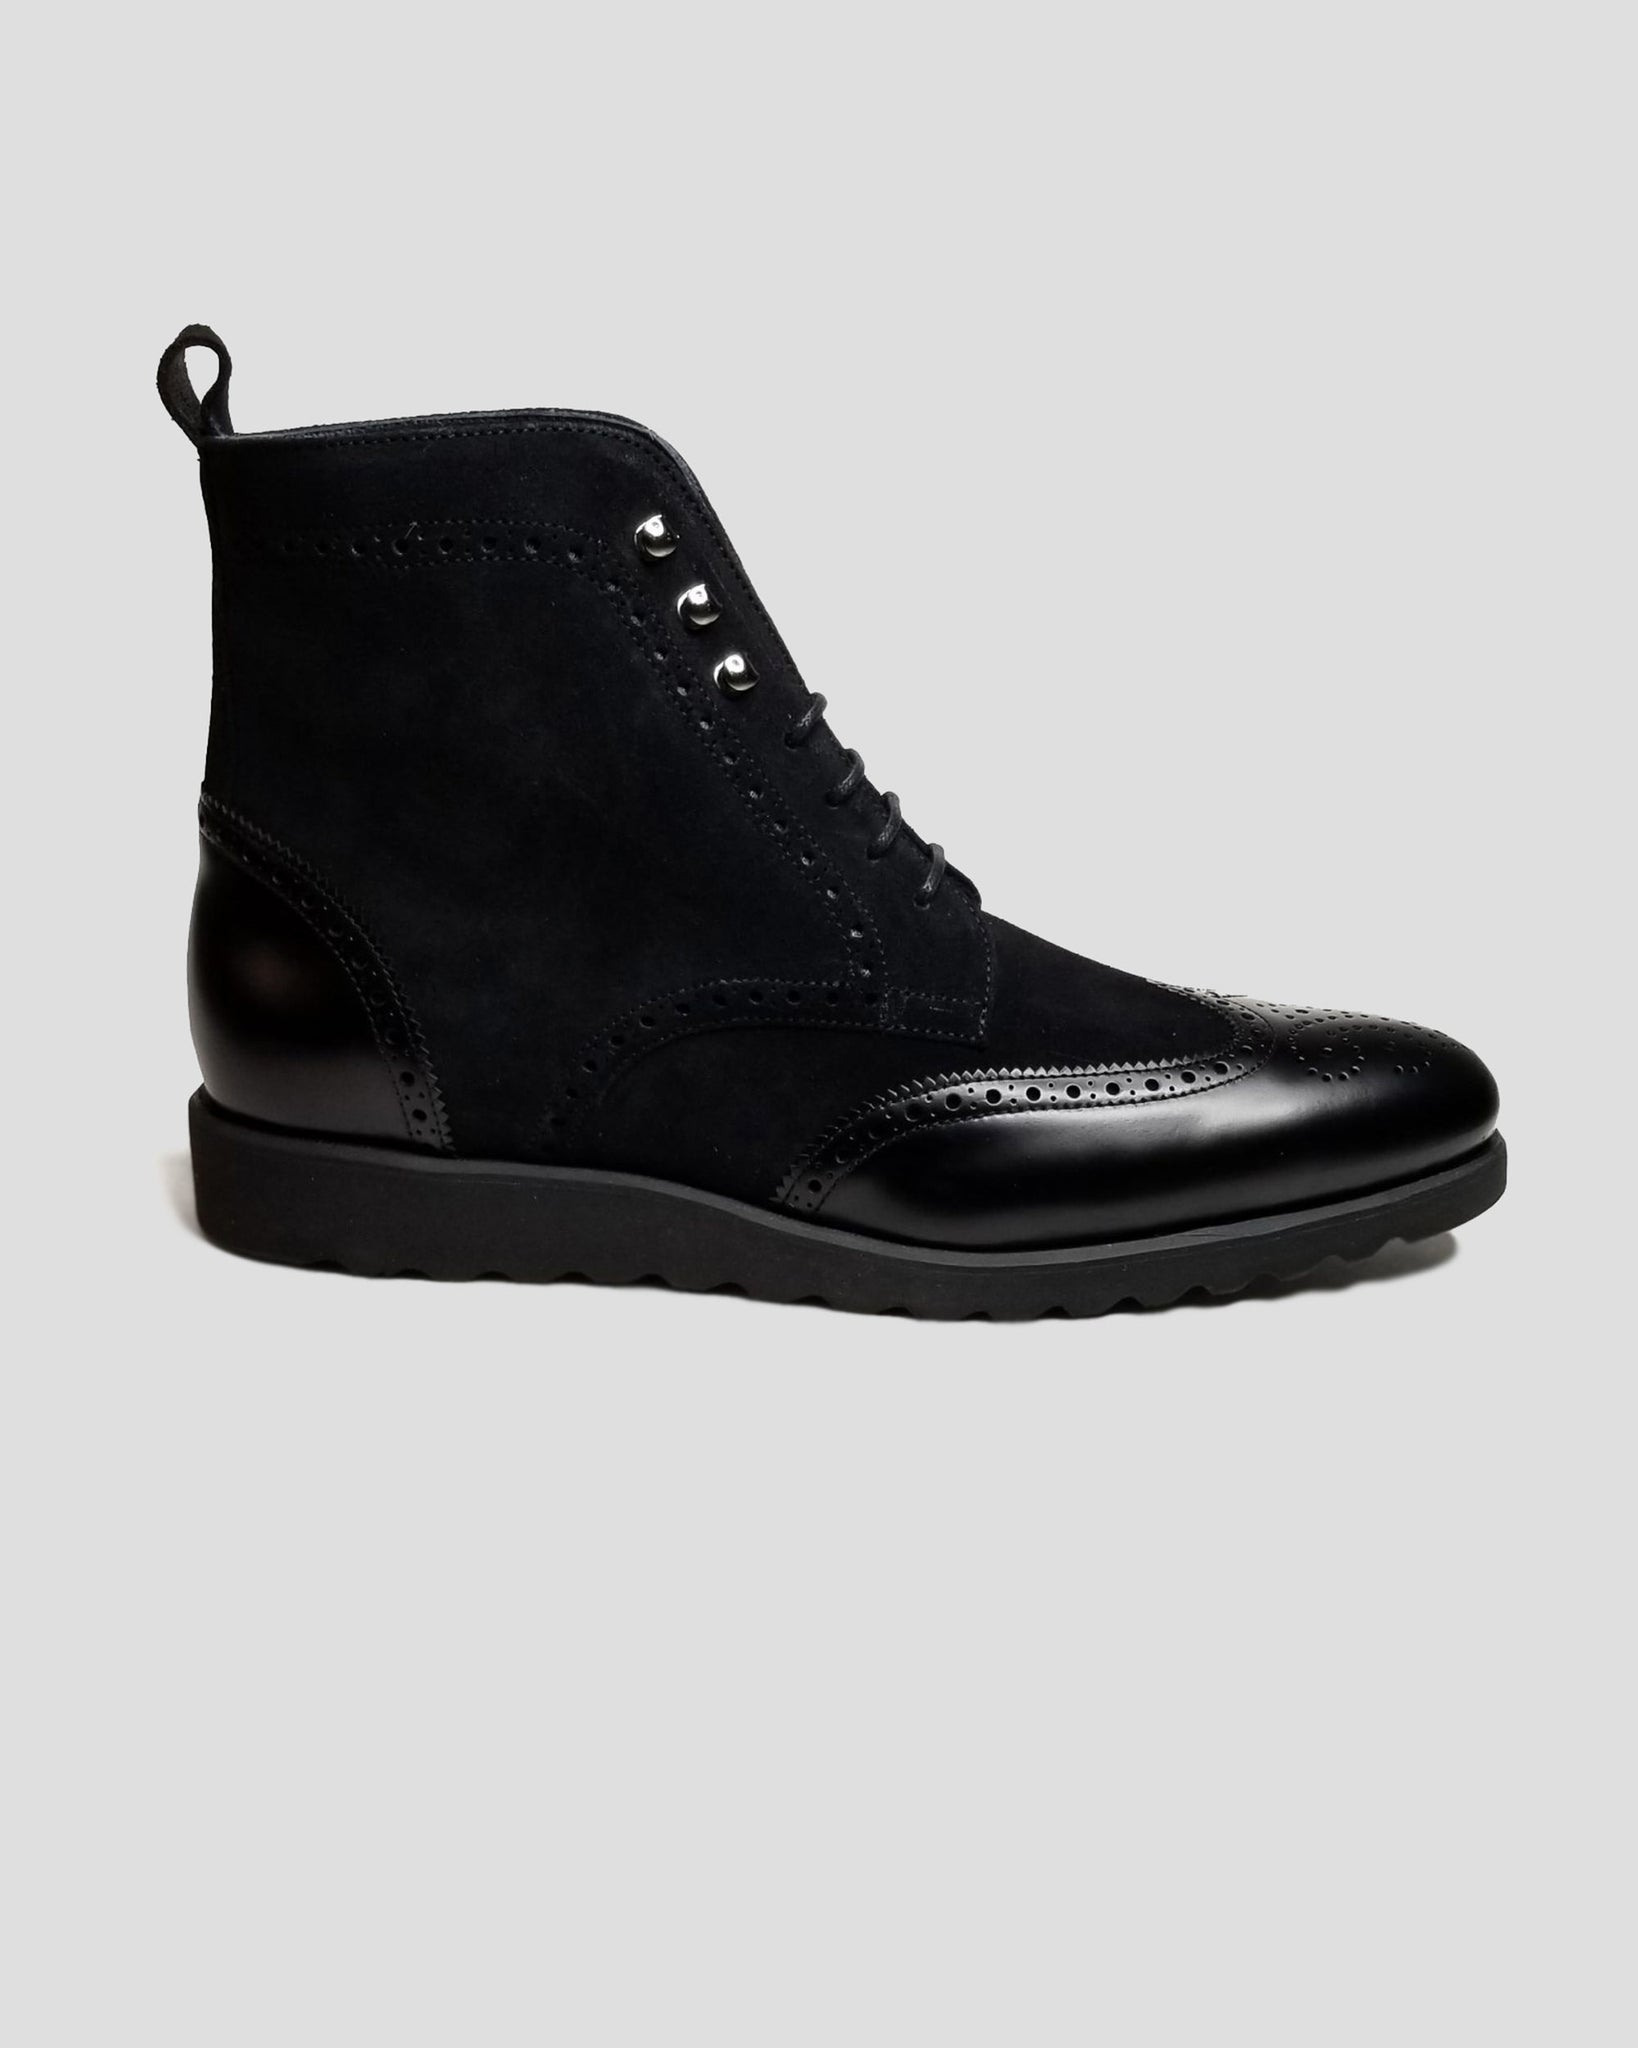 Southern Gents Rogue Sport Boots - Triple Black 